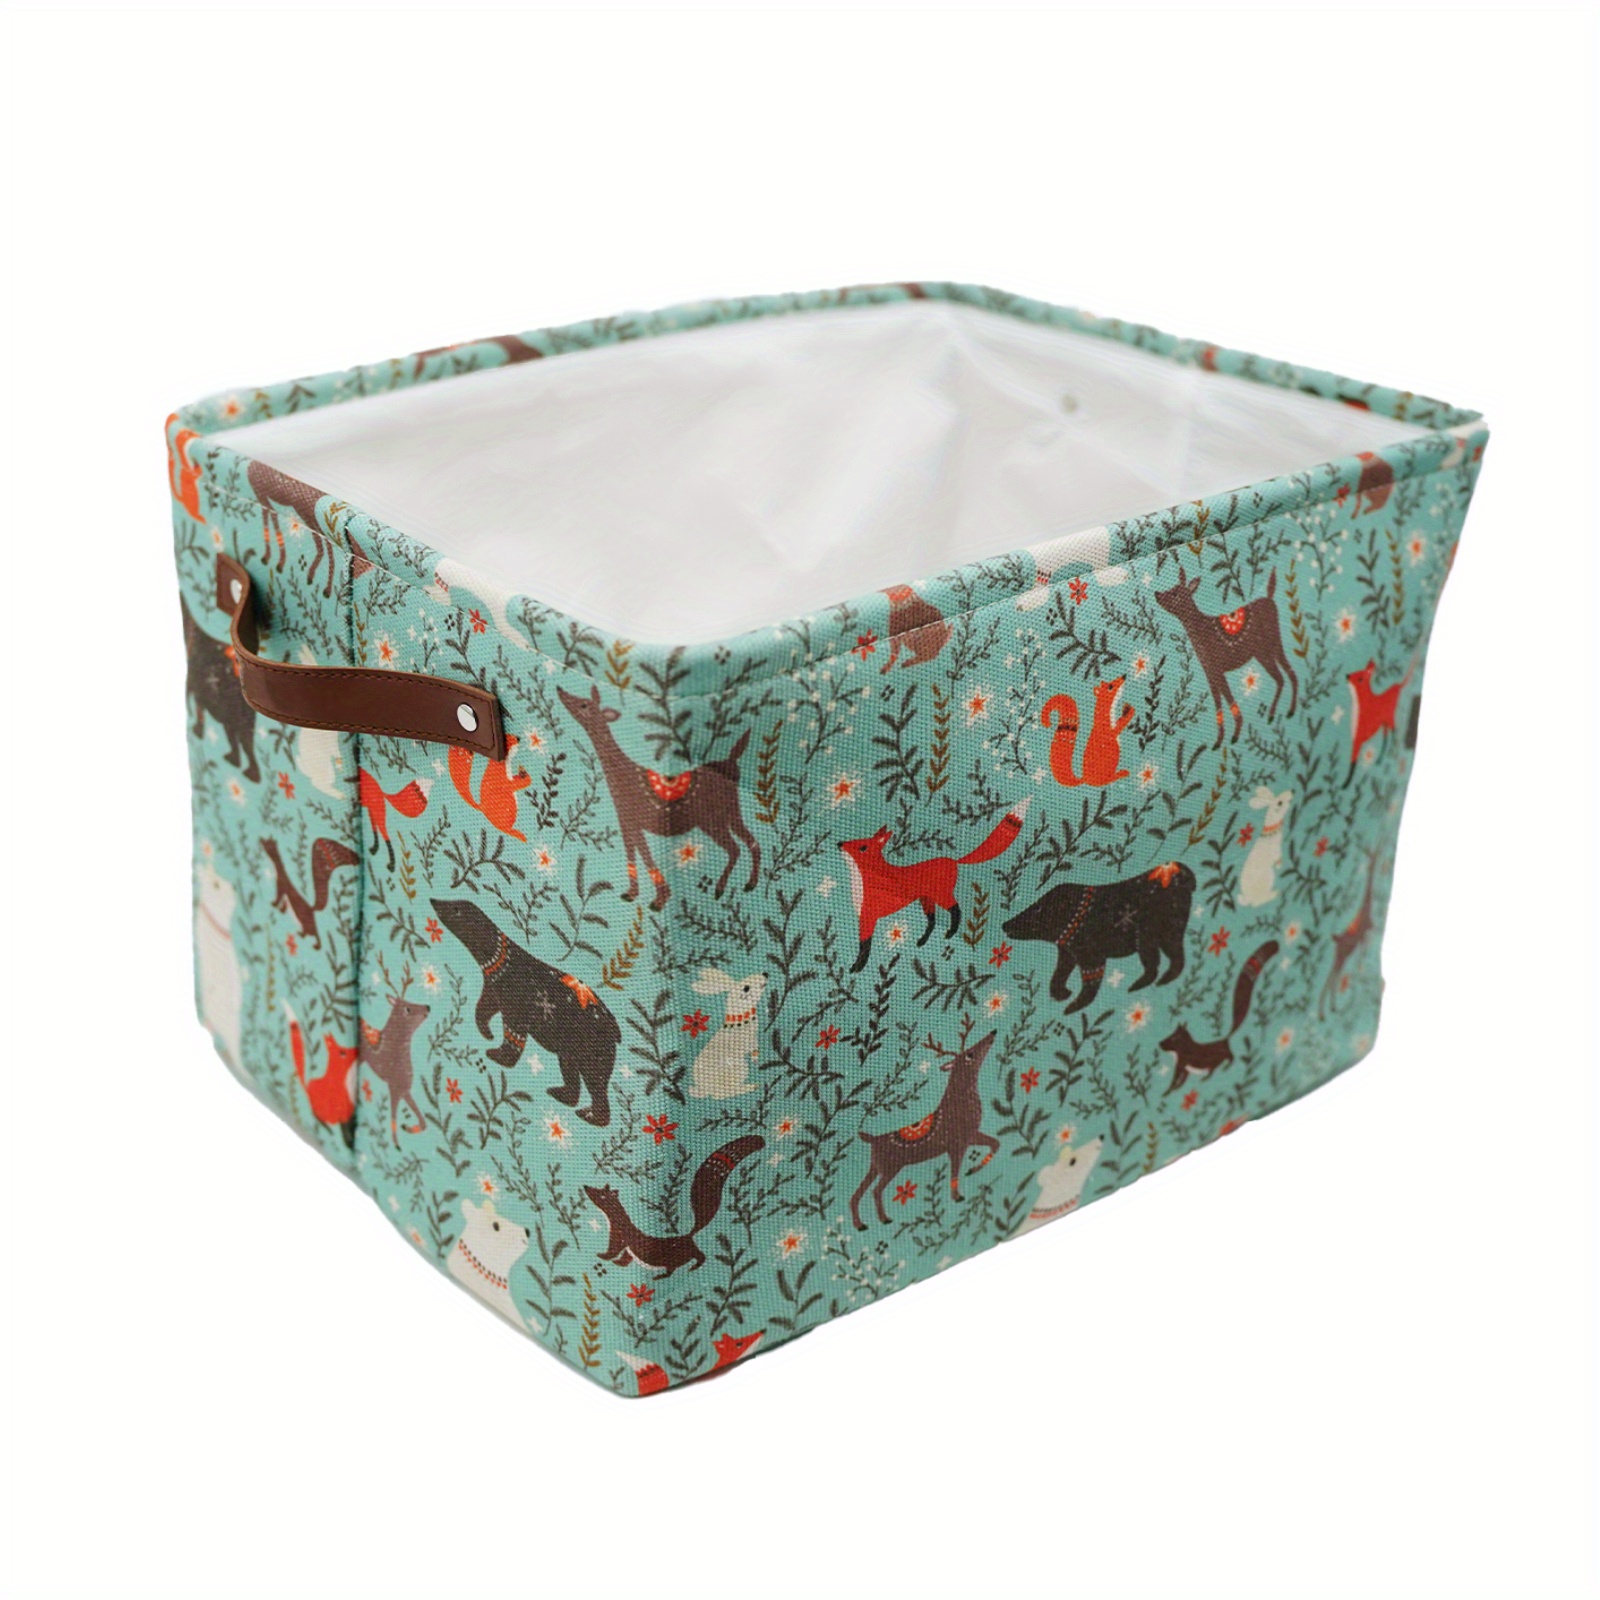 Big Save! Storage Bins for Baby, Kids or Pets - Fabric Collapsible Storage  Bin for Toy Container, Nursery Basket, Clothing, Books, Gift Baskets